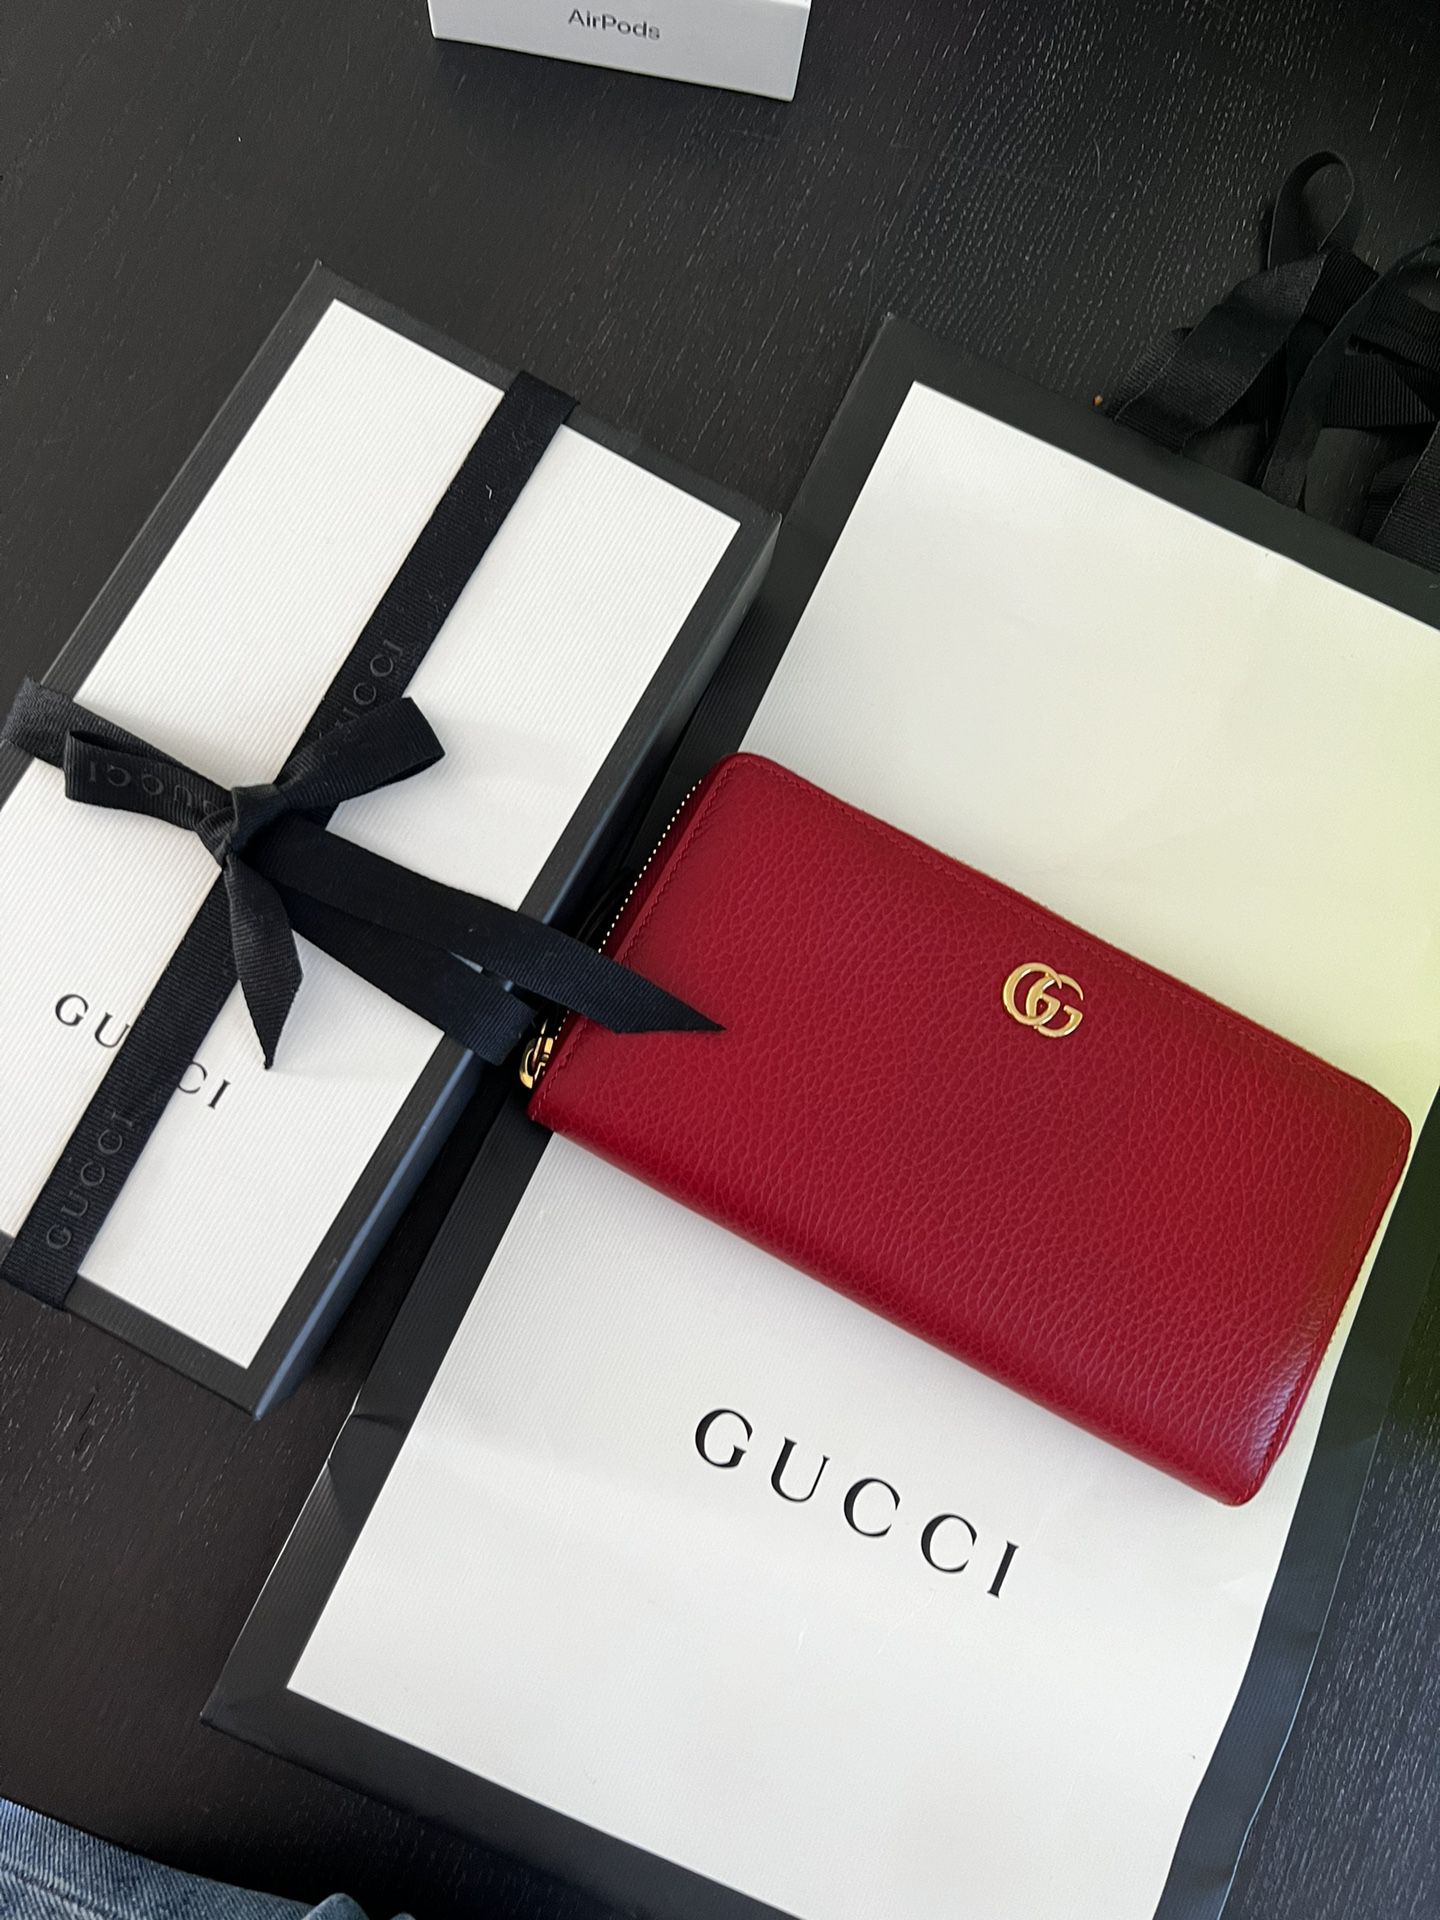 GUCCI WALLET - RED 